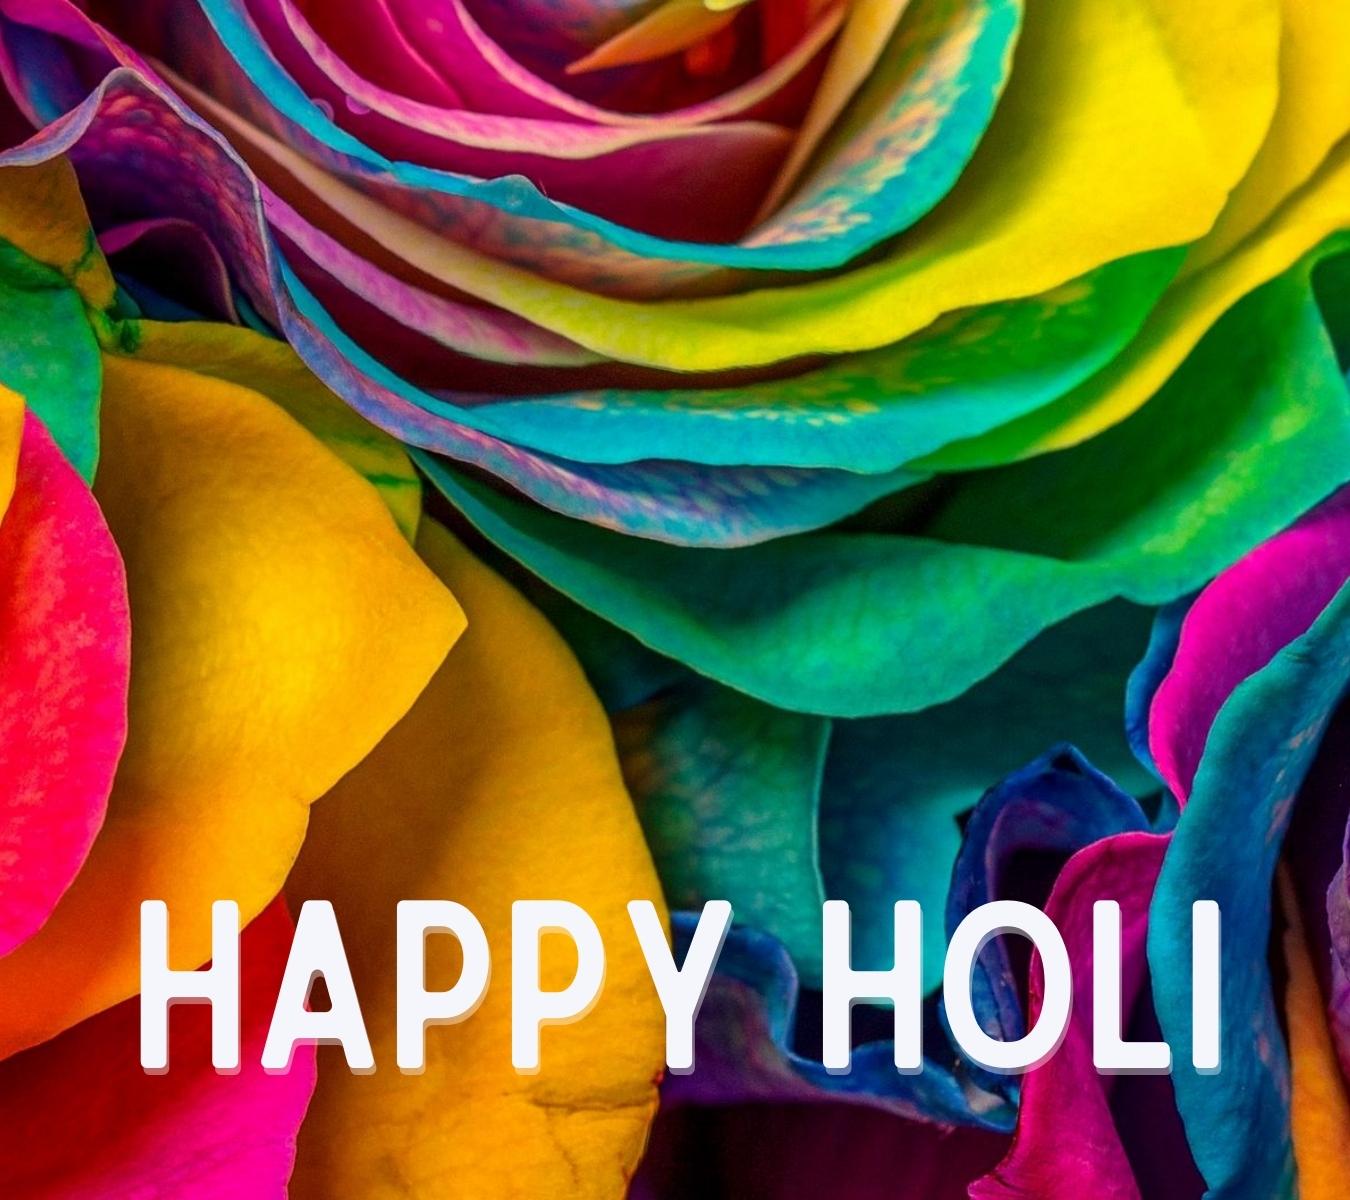 happy holi hd image with rose download for whatsapp